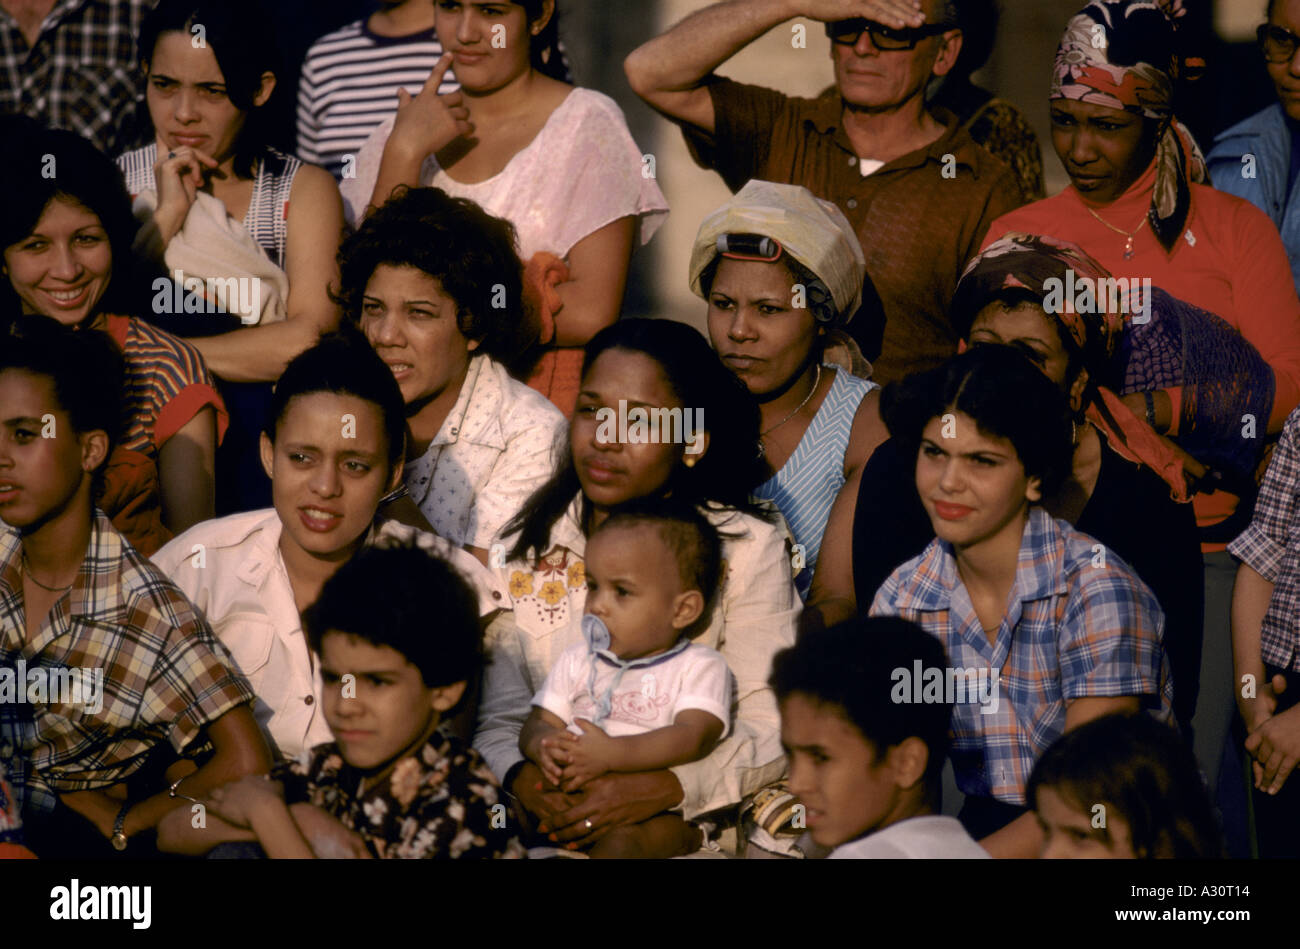 Crowds of people at a rally celebrating the anniversary of the Cuban Revolution, Cuba Stock Photo